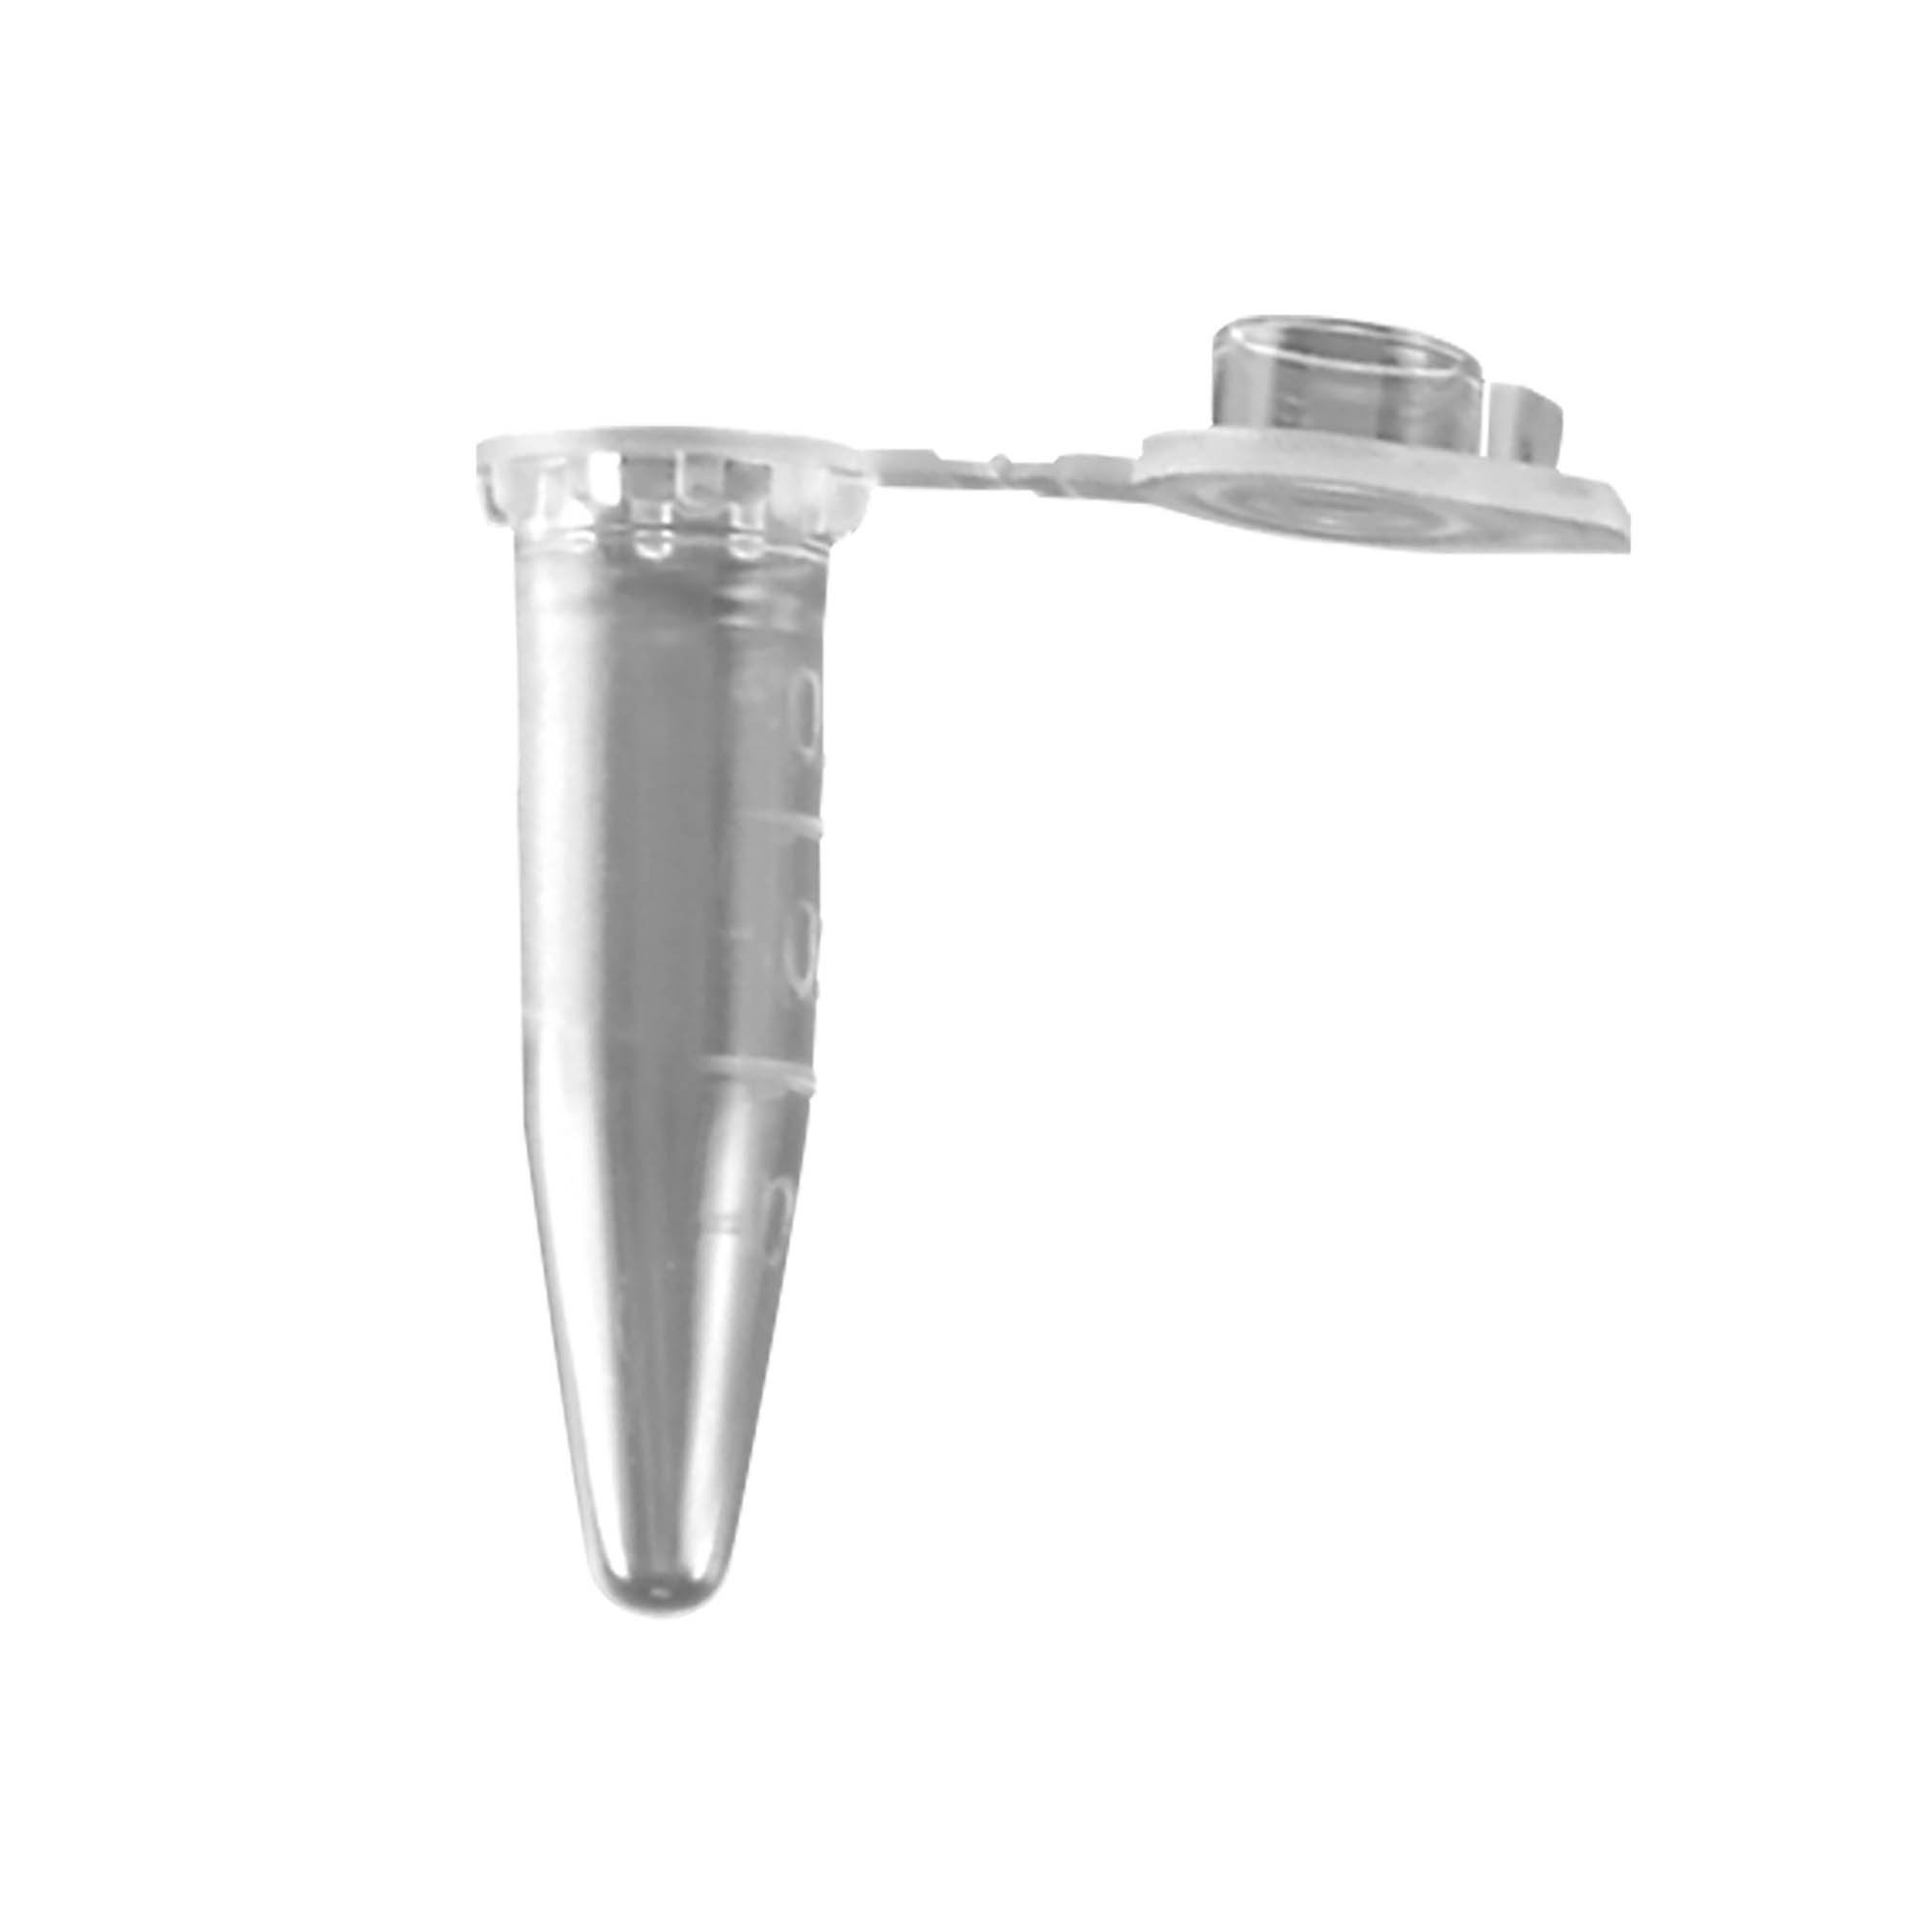 Microcentrifuge Tube with Locktop Style Cap - 0.5mL, Pack of 1000